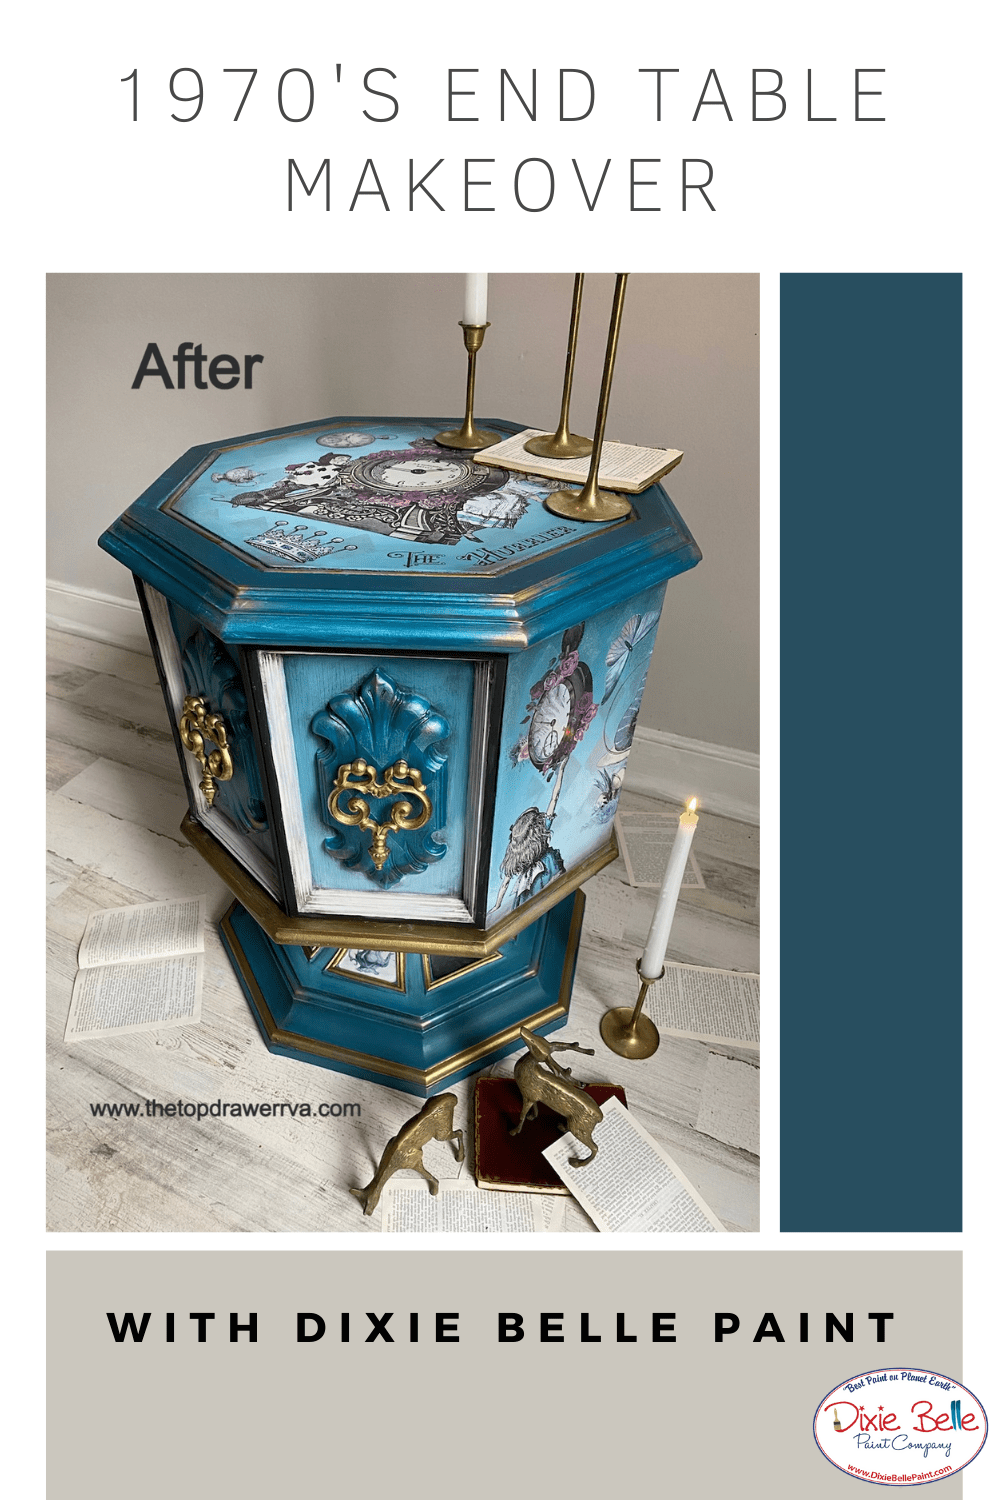 A 1970's End Table Makeover